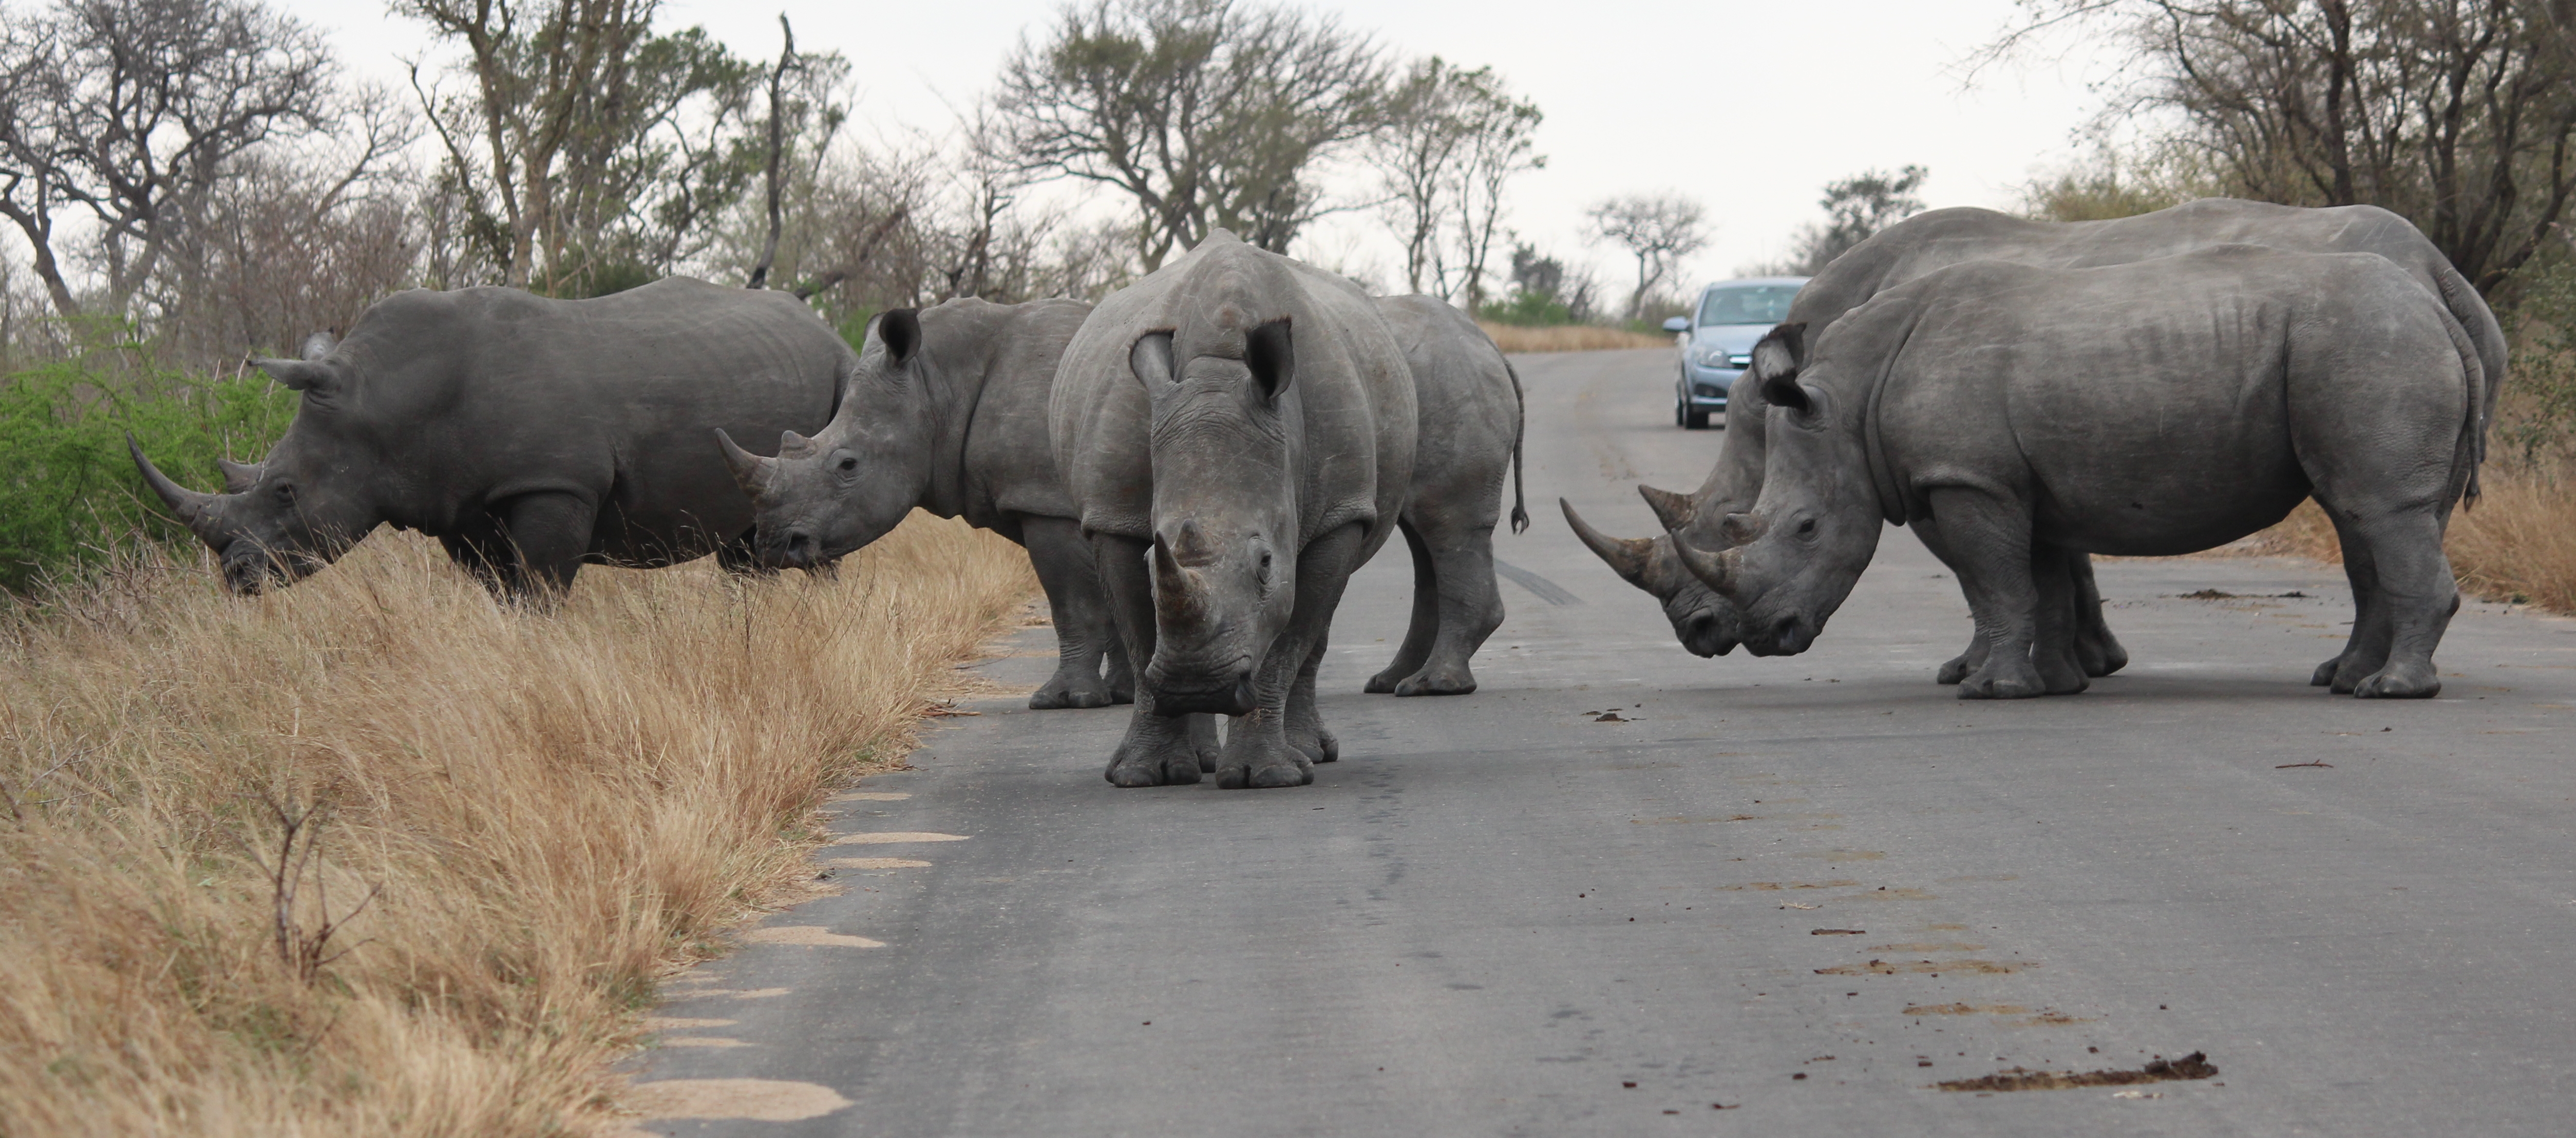 These five rhino came into the road, stood unmoving for twenty minutes.